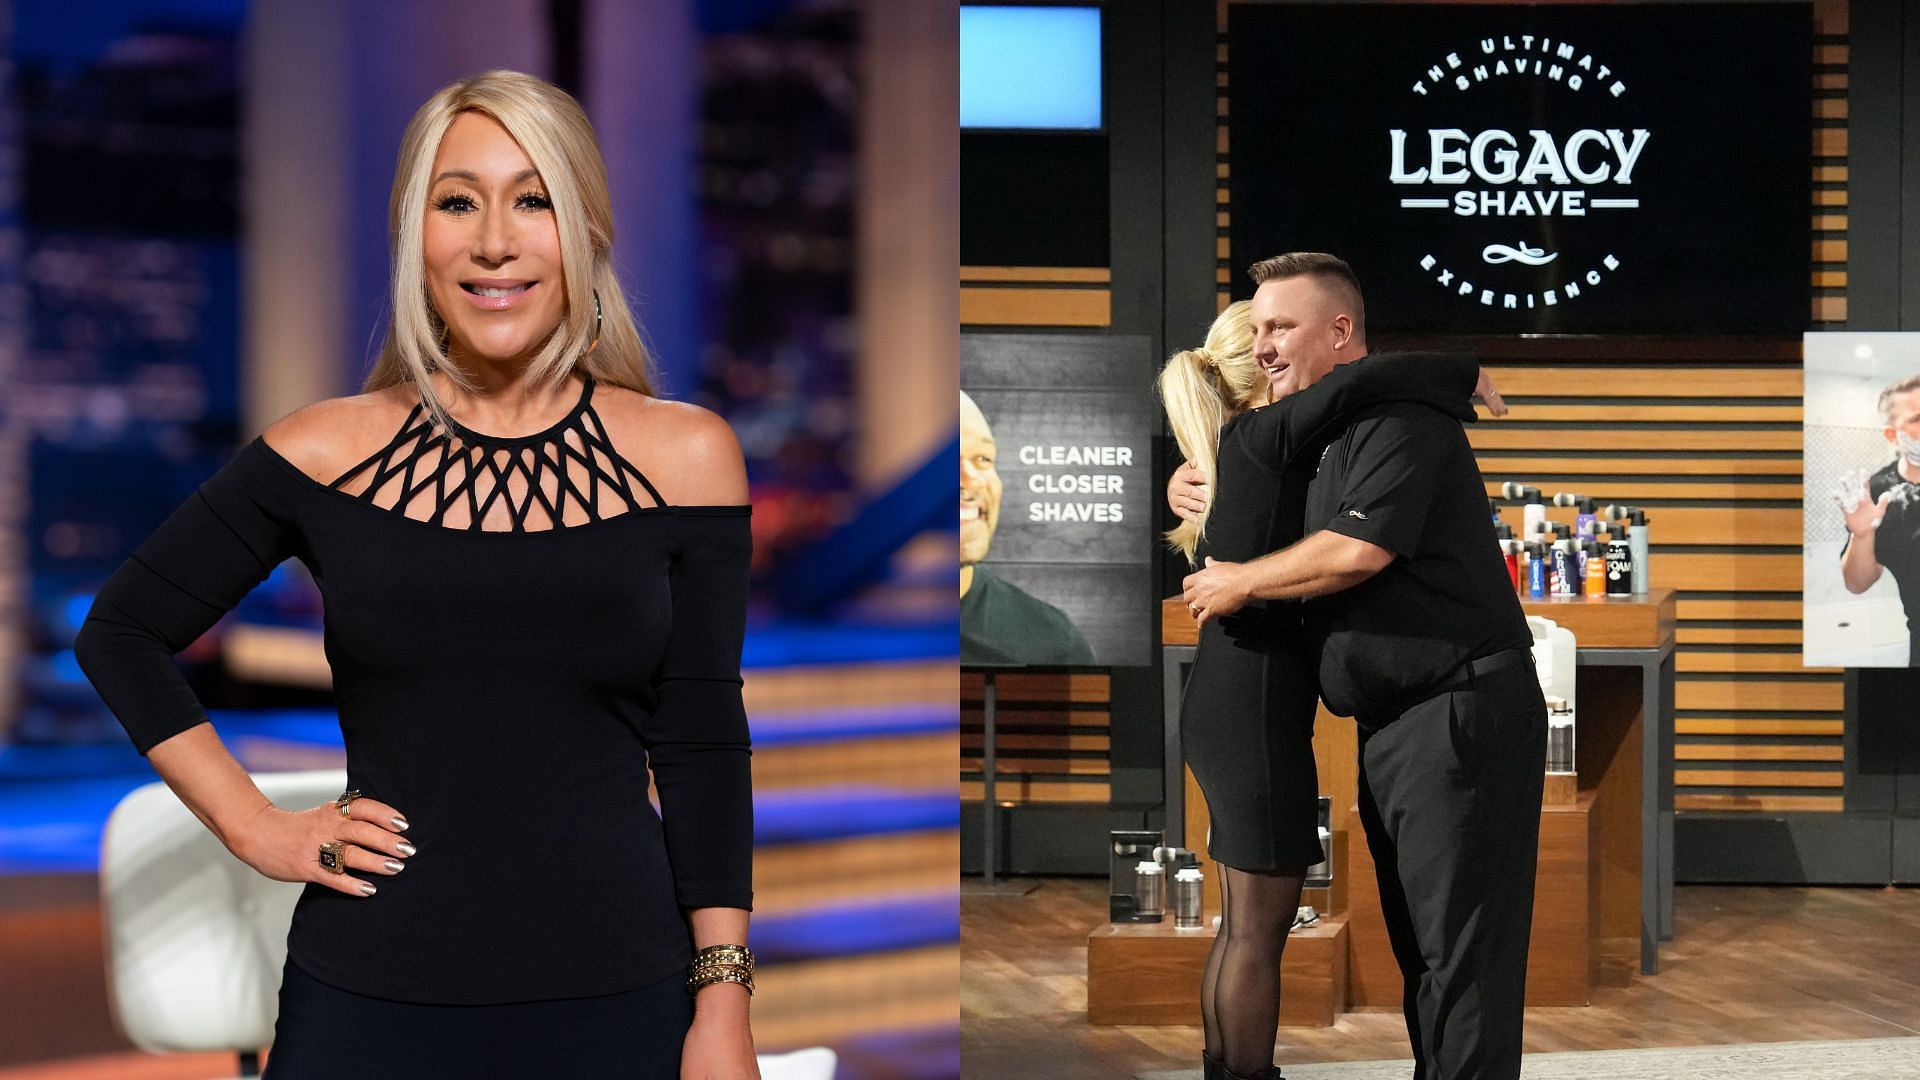 Lori Greiner made a deal with Legacy Shave founder Mike Gutow